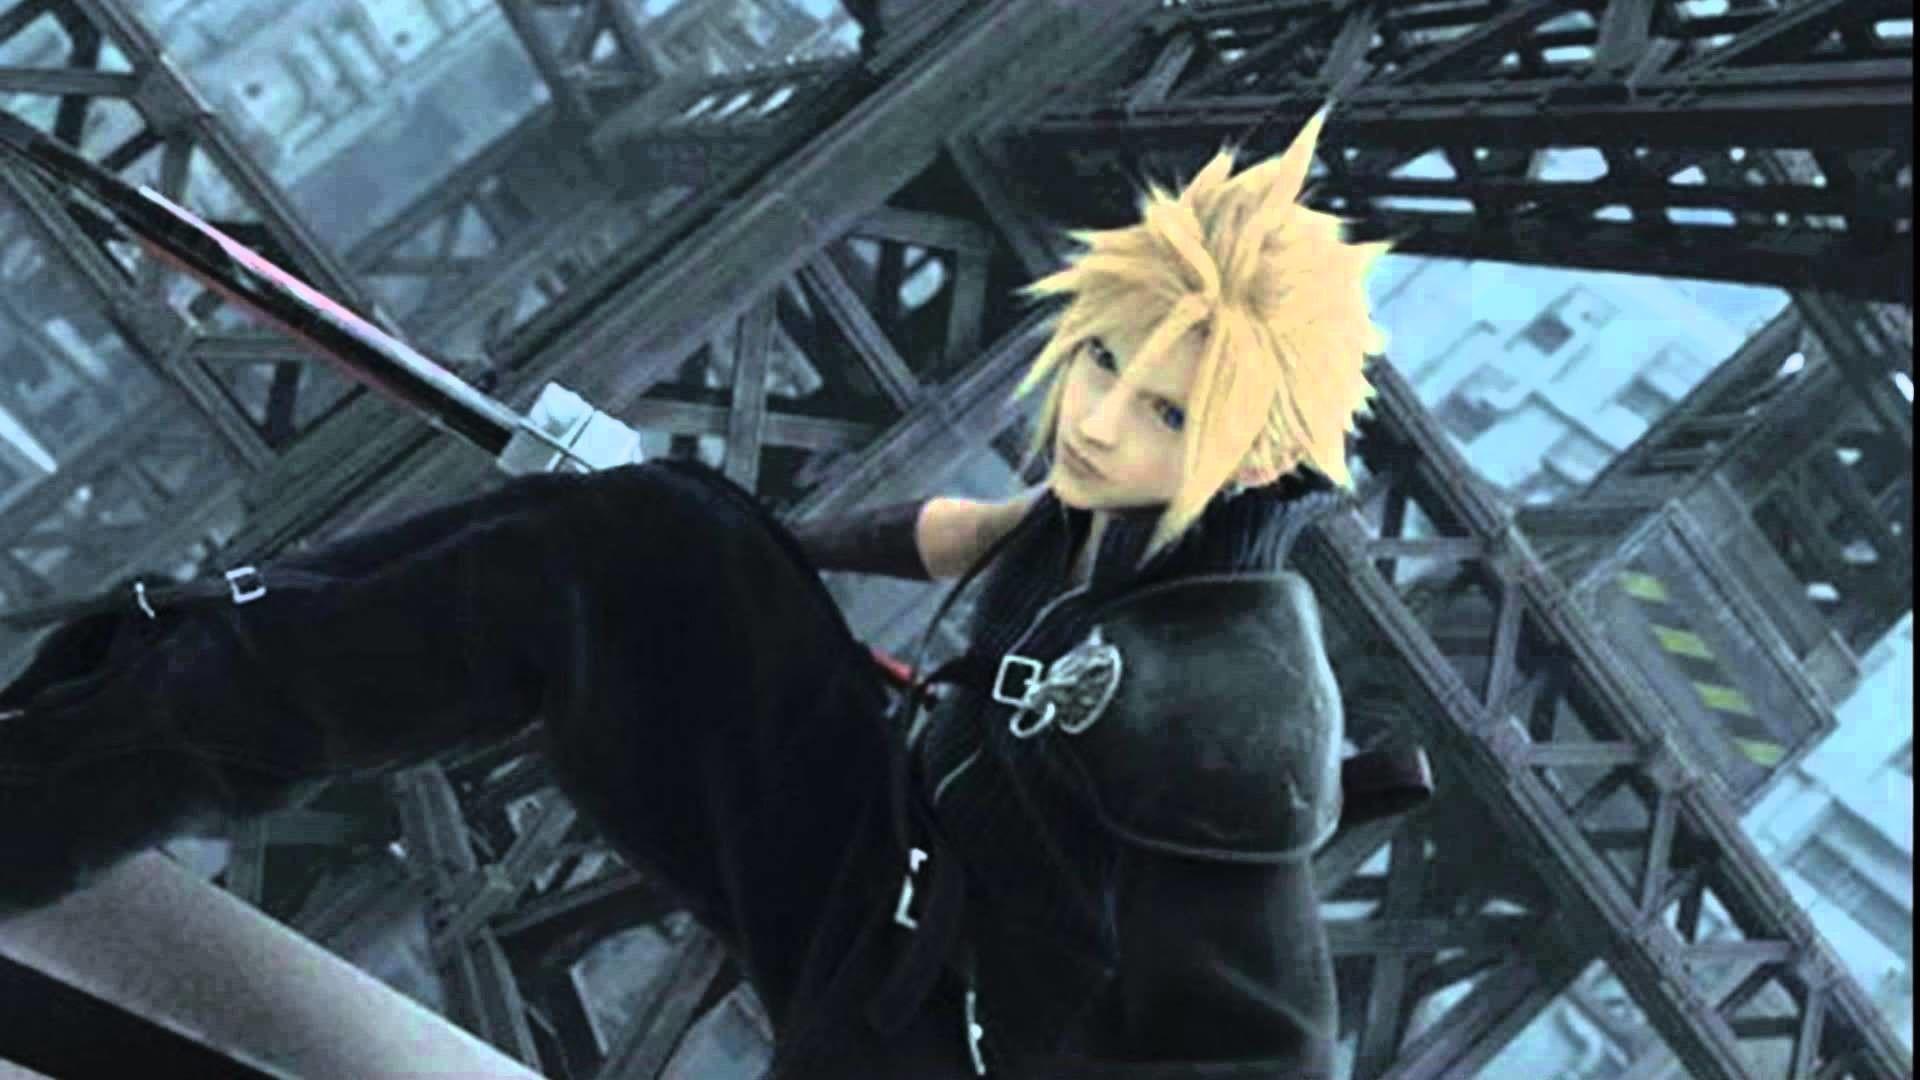 Cloud Strife Wallpapers Top Free Cloud Strife Backgrounds Images, Photos, Reviews